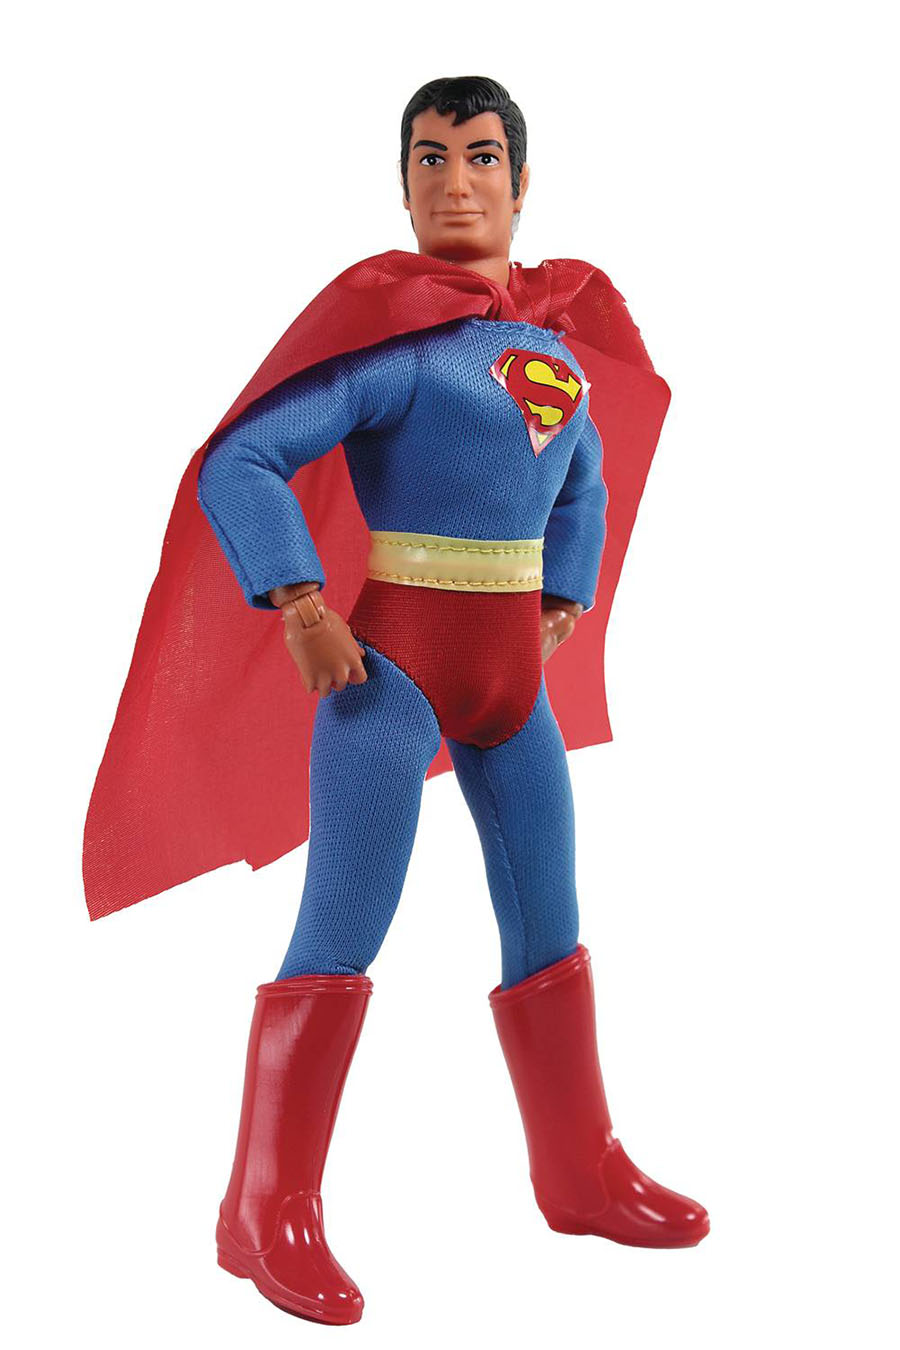 Mego DC Classic 50th Anniversary 8-Inch Action Figure - Superman